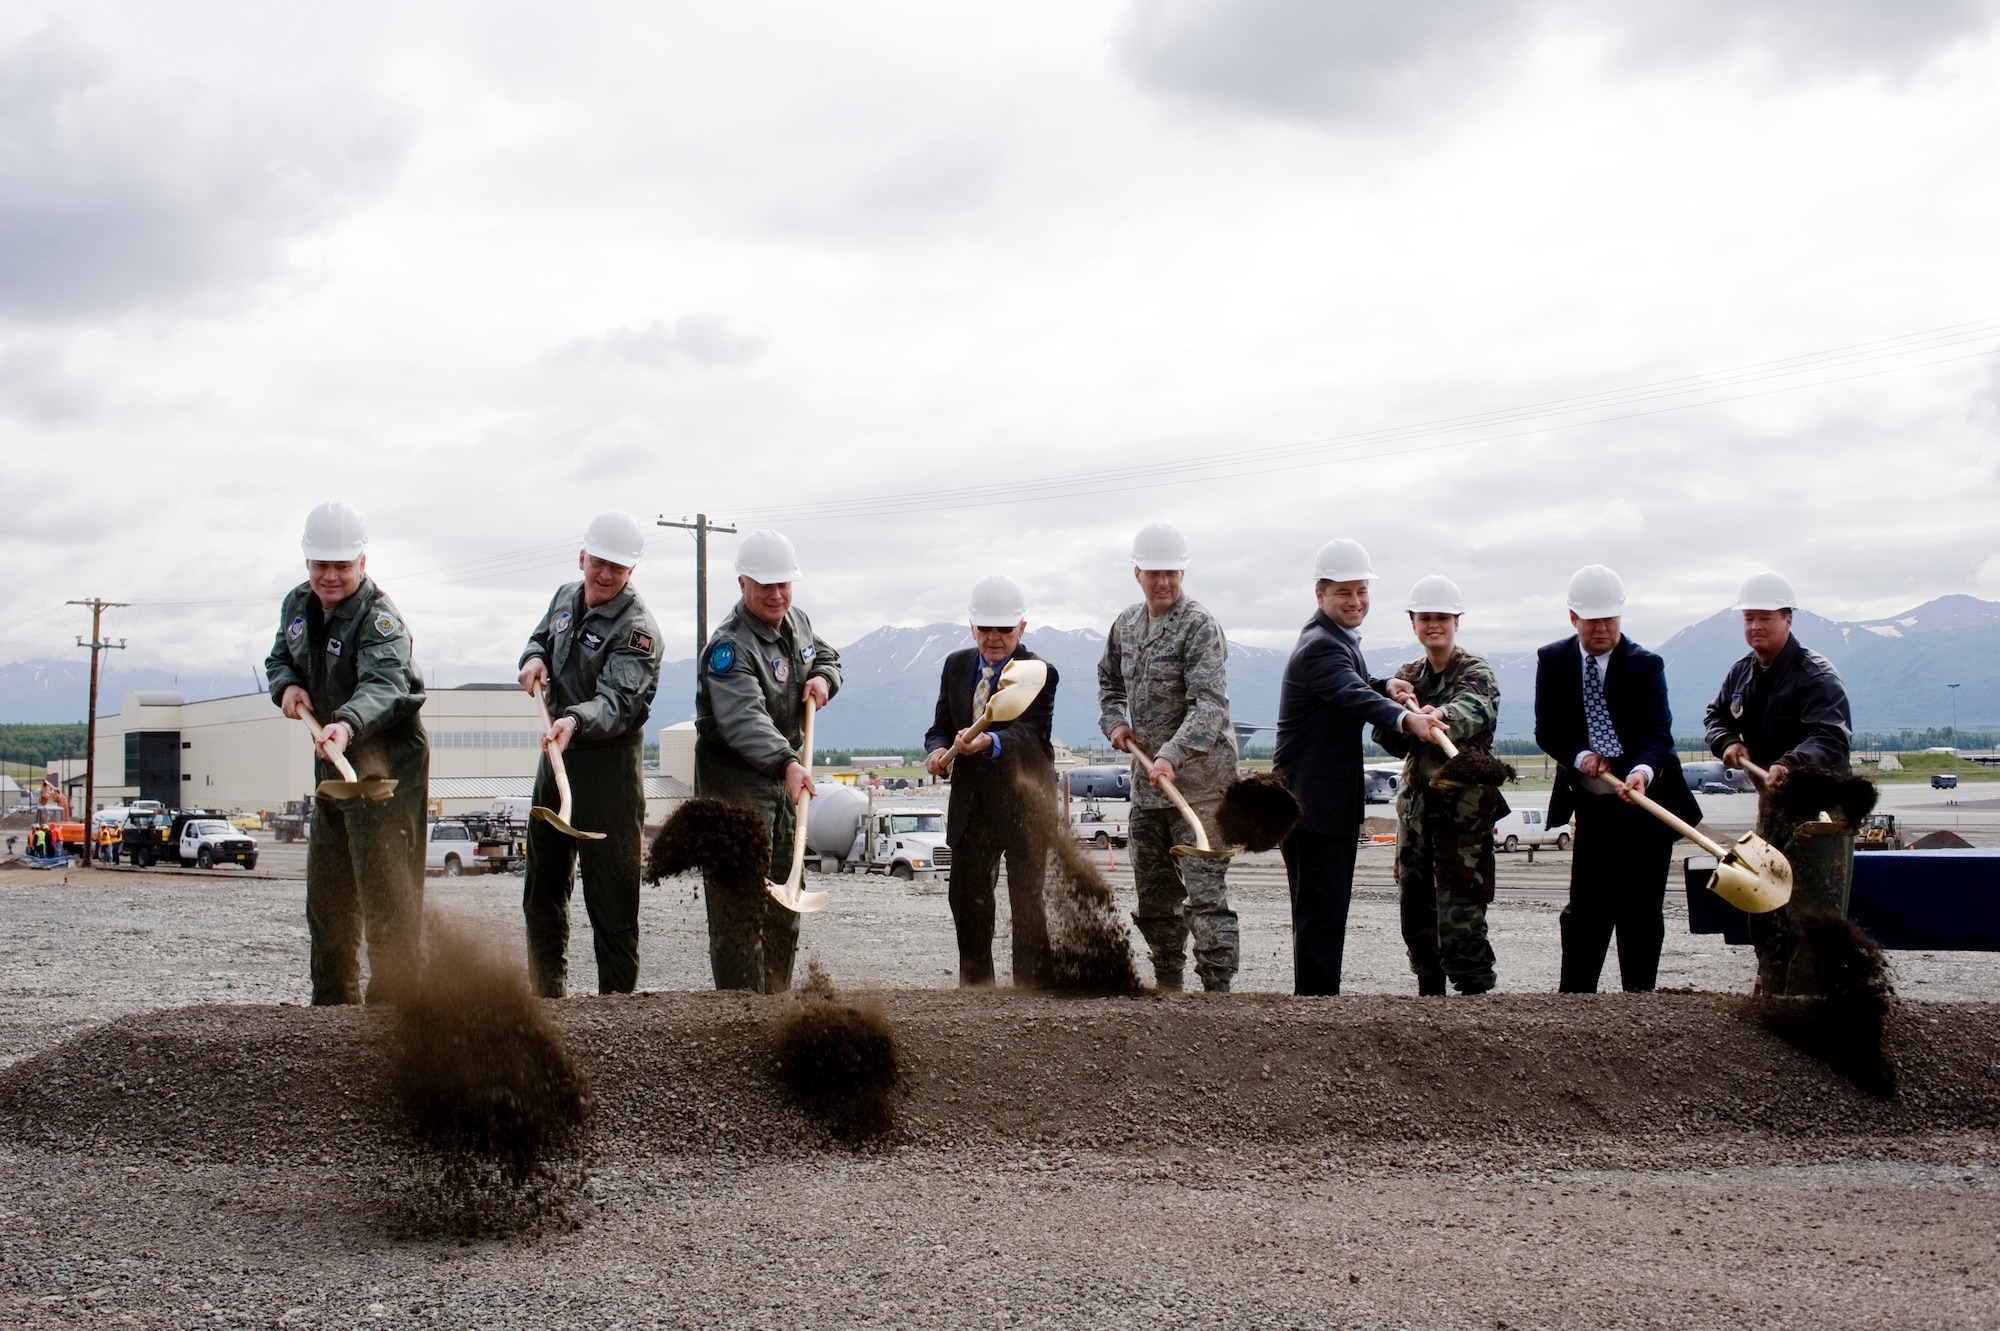 ELMENDORF AIR FORCE BASE, Alaska -- Members of Air Force and local leadership break ground on the 176th Wing here June 30. Kulis Air National Guard base, currently collocated with Ted Stevens International Airport, is set to be moved from their current location to Elmendorf by 2011. (U.S. Air Force photo/Senior Airman Jonathan Steffen)